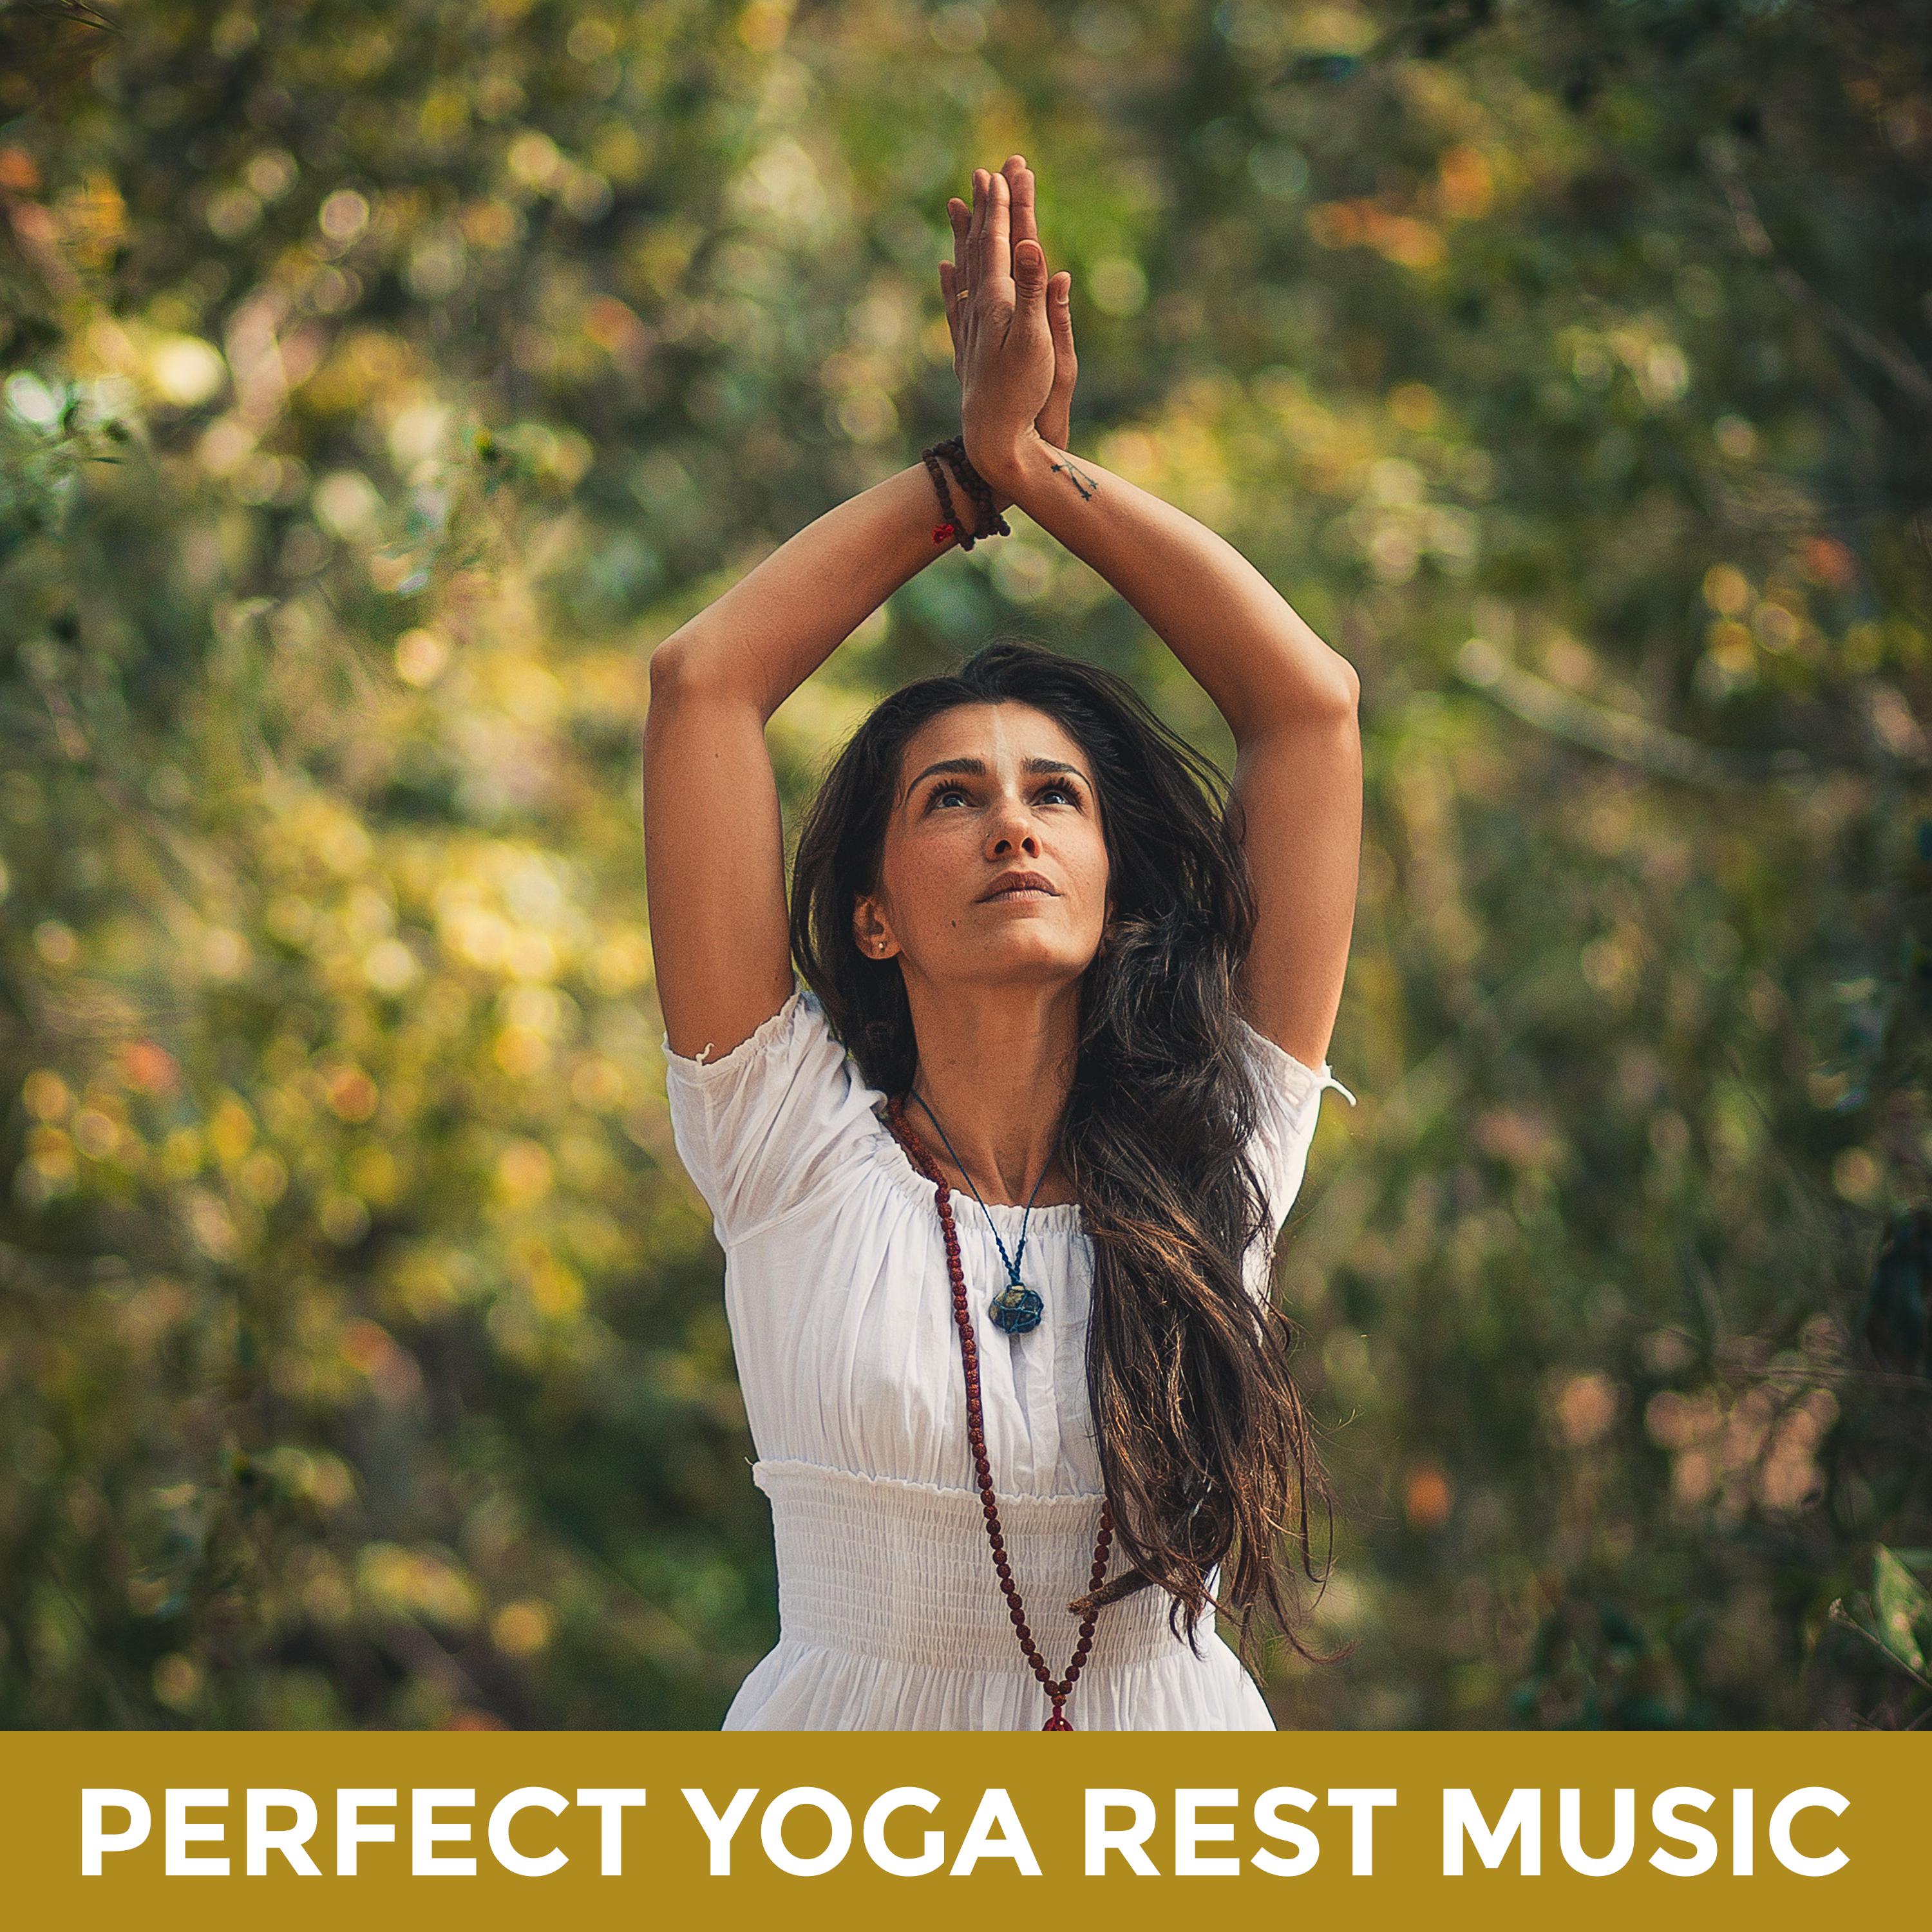 Perfect Yoga Rest Music: 2019 New Age Ambient Melodies for Meditation & Deep Relaxation, Mantra Zen Vibes, Contemplation Time, Chakra Healing